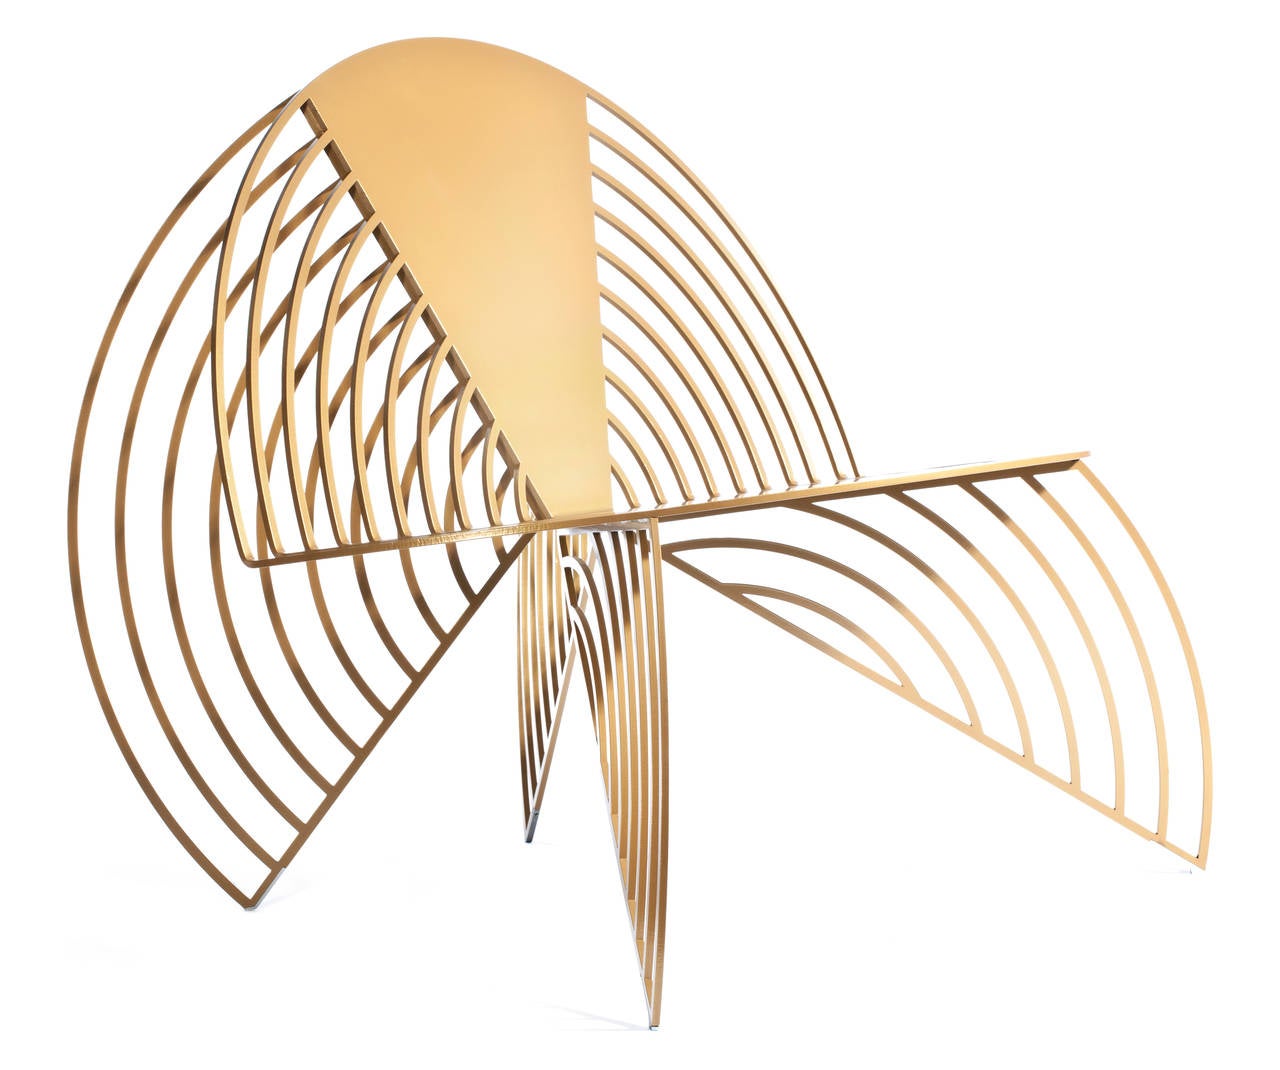 The wings of steel chair is fabricated from laser-cut steel and powder coated in a variety of durable colors for outdoor and indoor use.

While the material is strong, the form is light as a butterfly about to take flight. Its laser cut strips